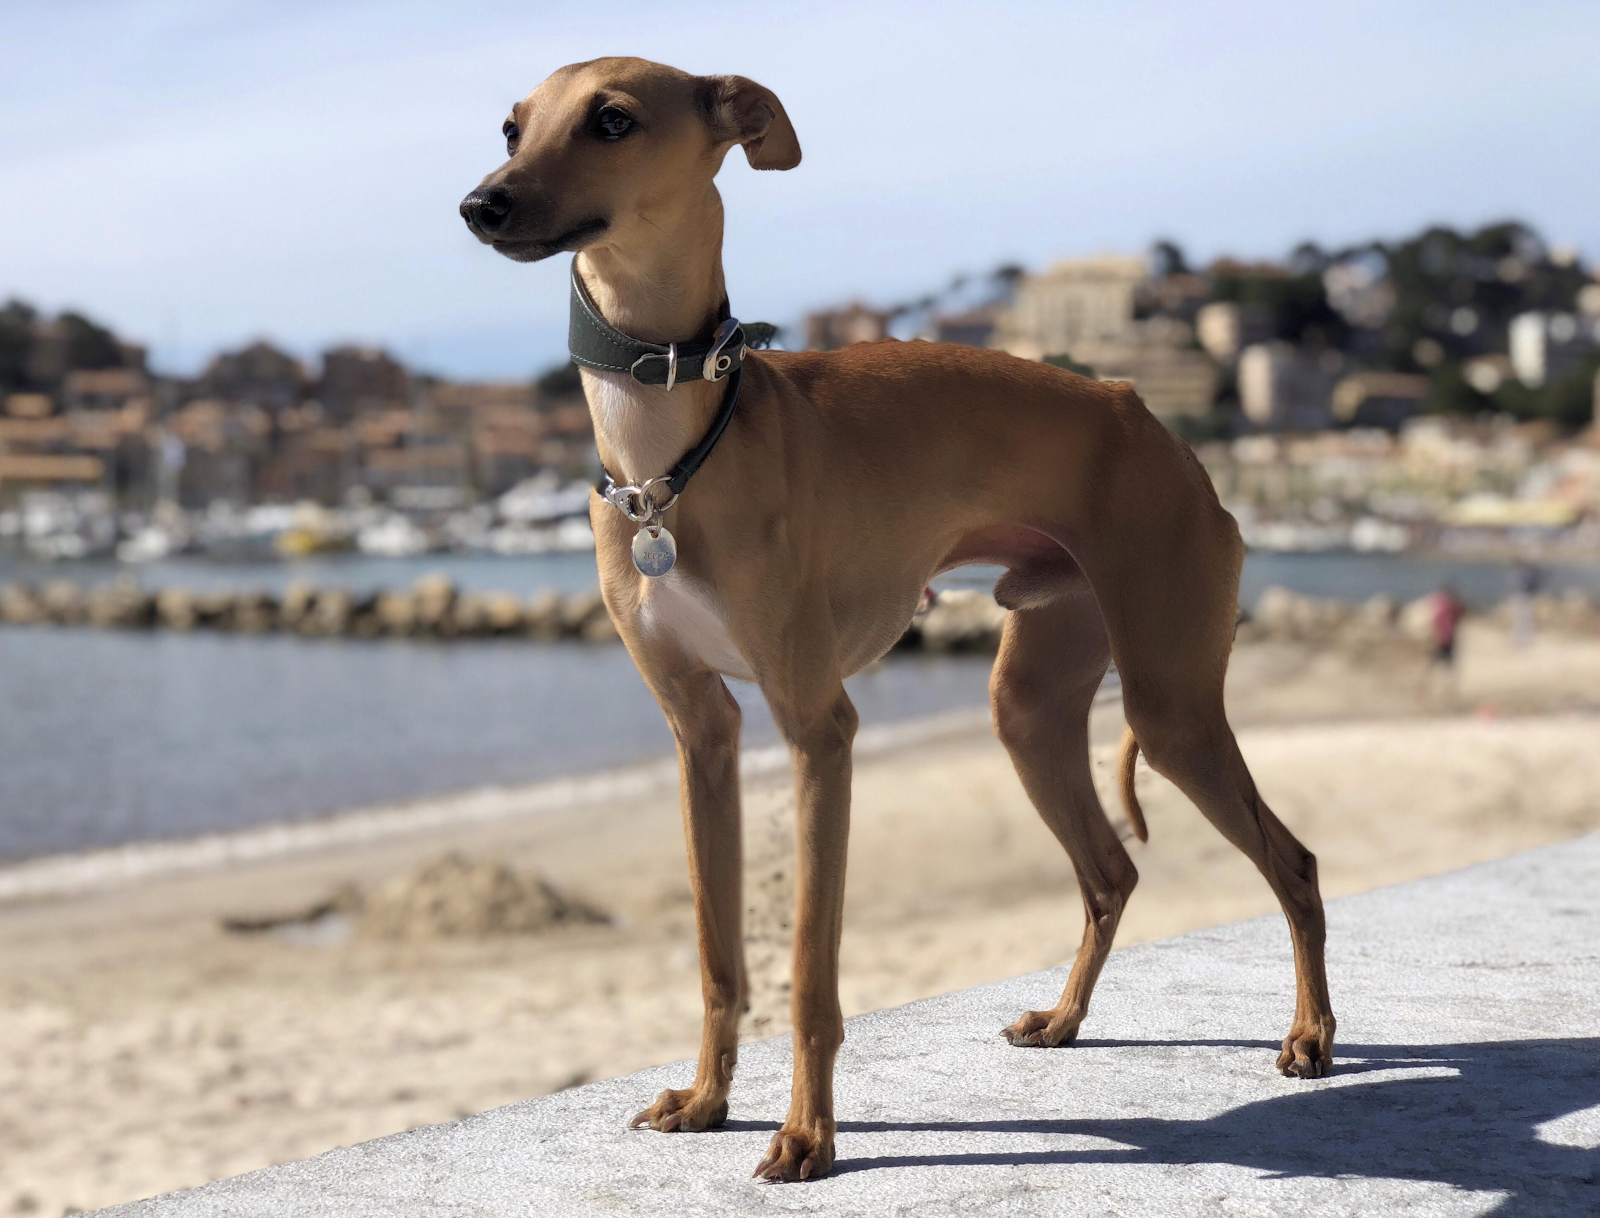 A small, slim, tan dog is standing on a wall in front of a beach